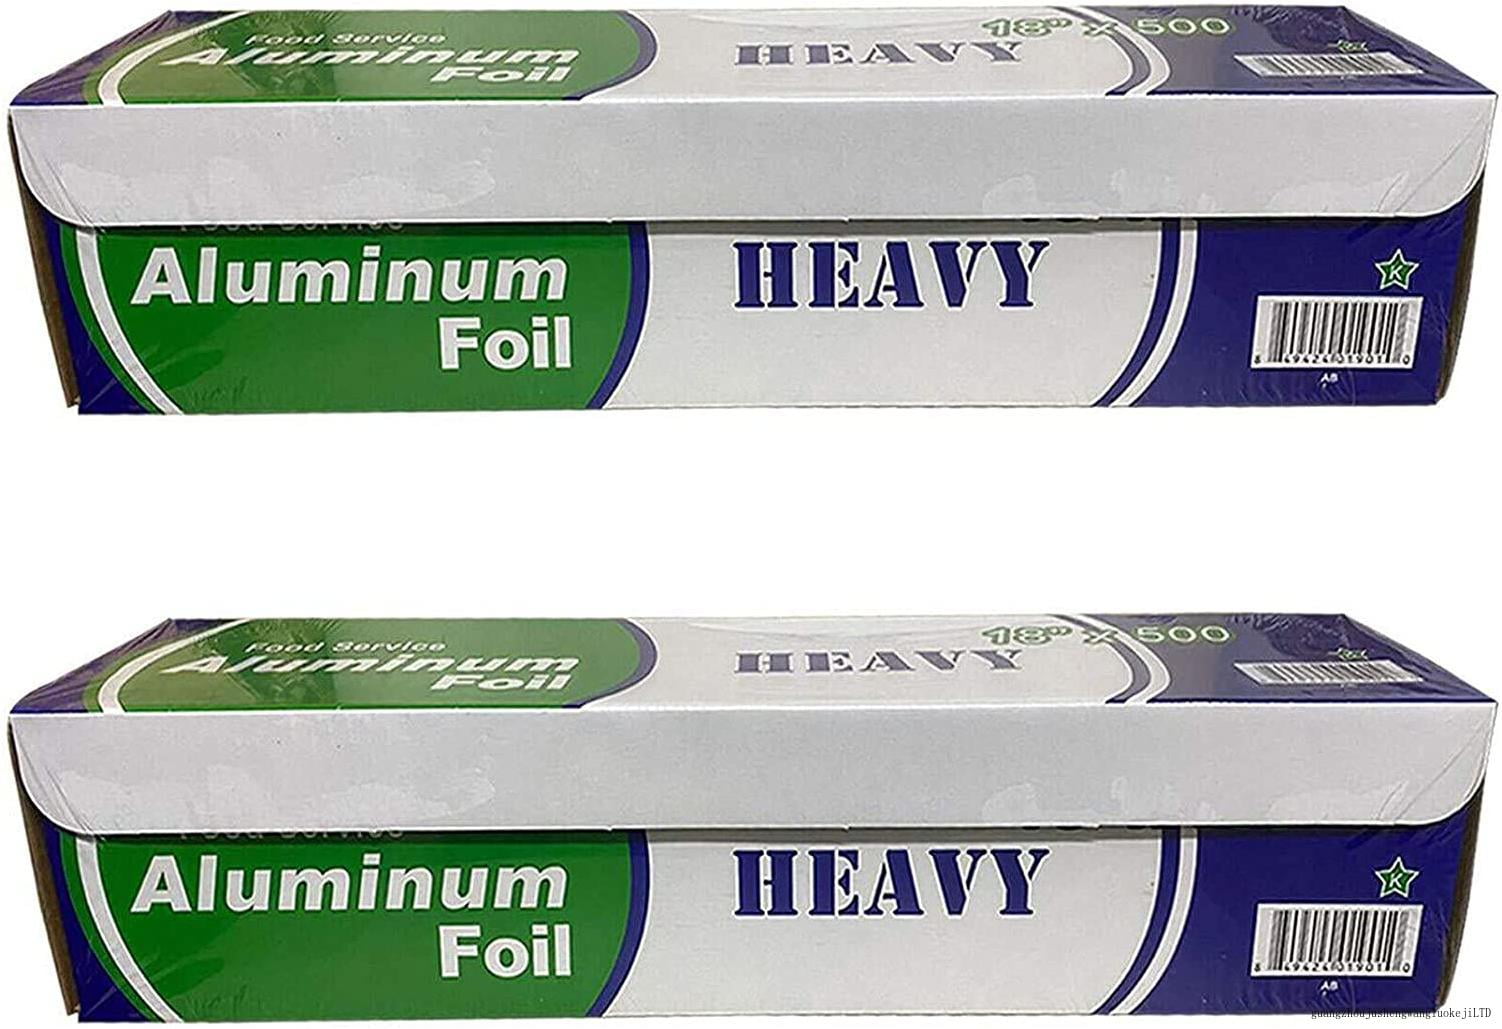 Aluminum Foil Wrap Roll 18 in x 500 ft Heavy Duty Commercial and Home Use